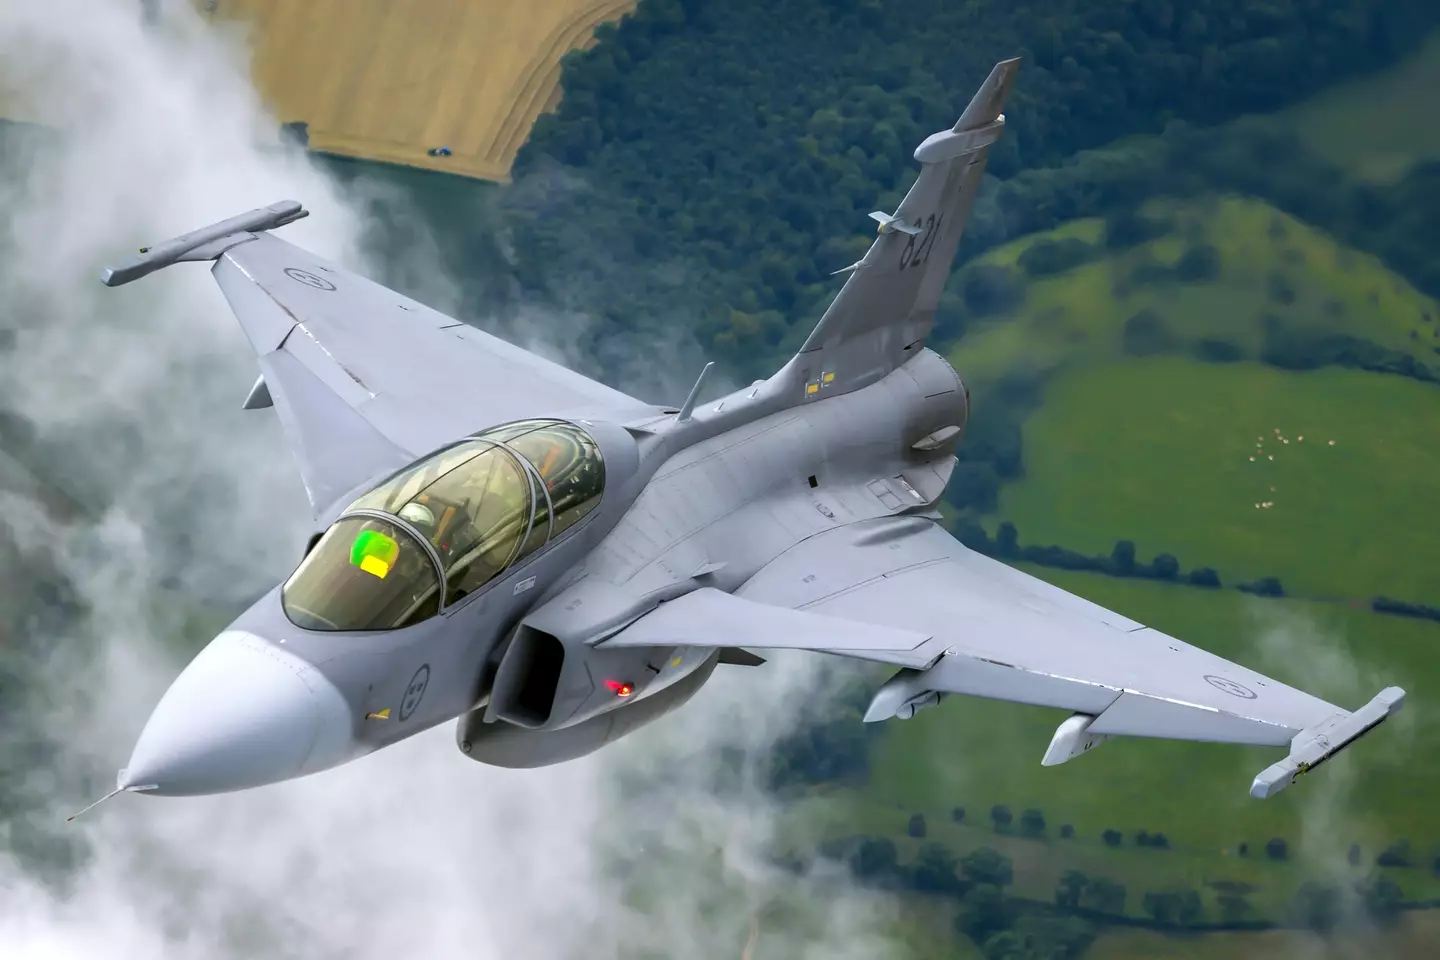 Pilots use the machines so they can fly the likes of the JAS-39 Gripen.